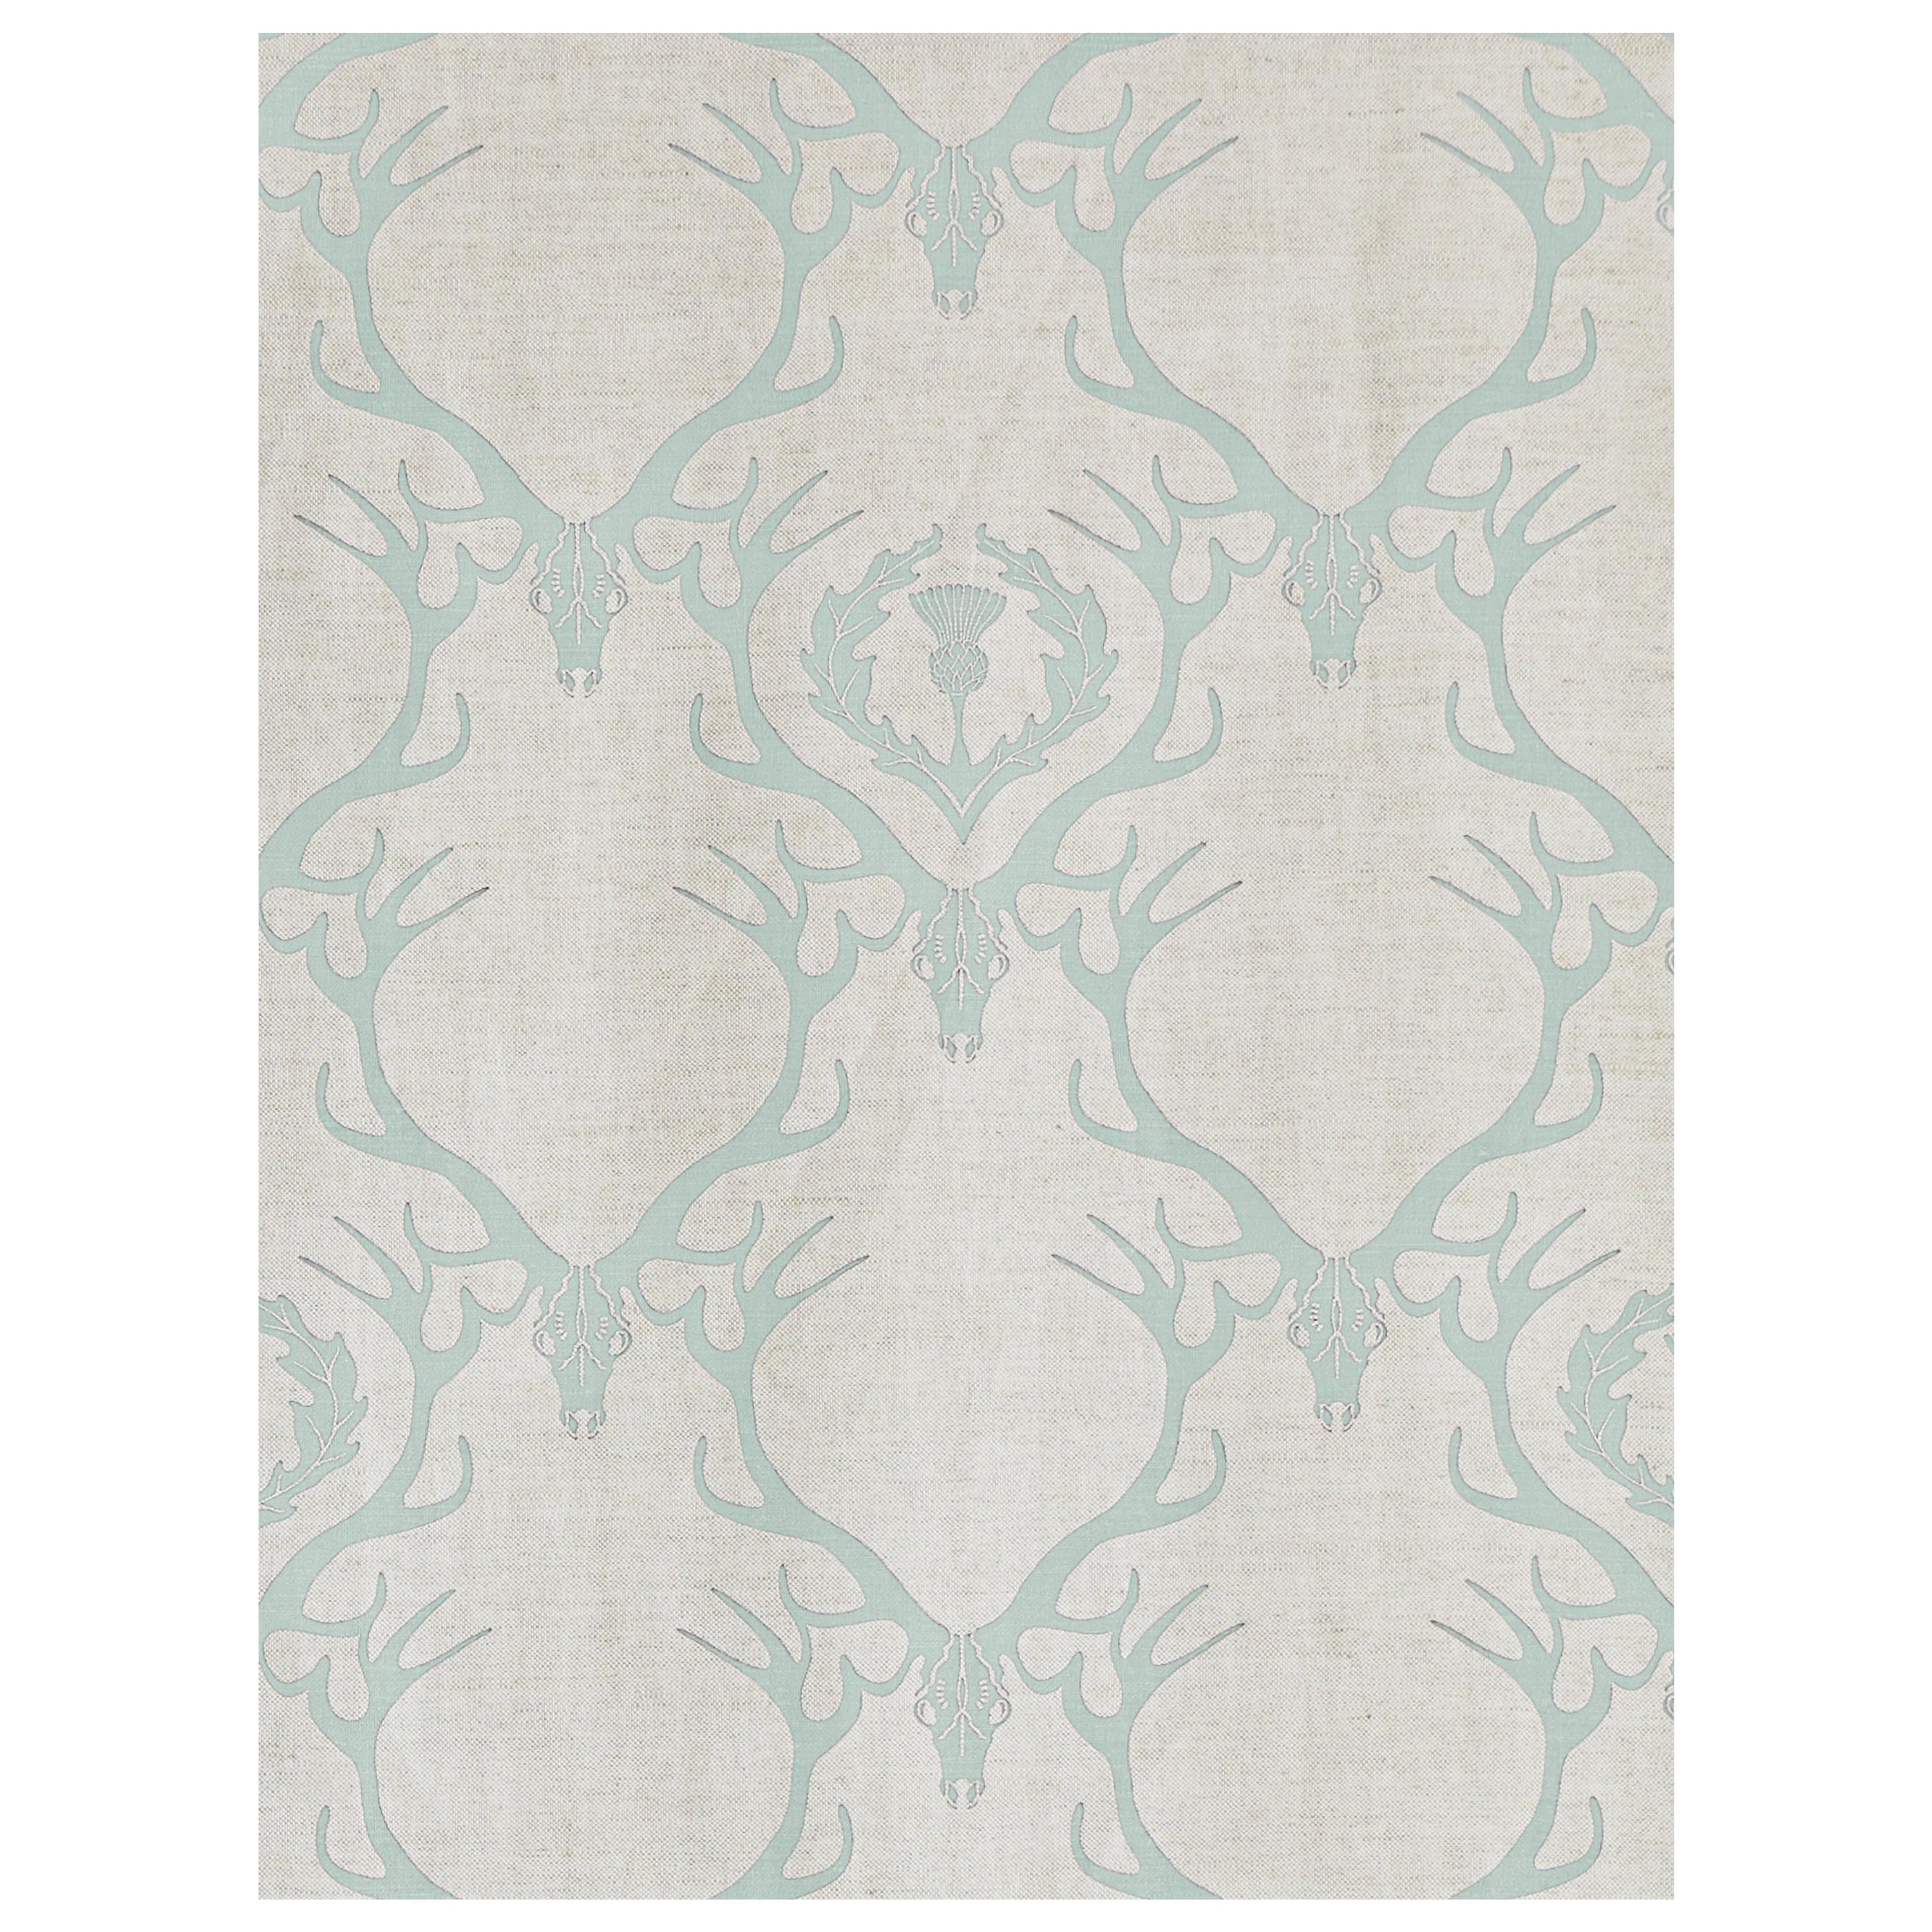 'Deer Damask' Contemporary, Traditional Fabric in Duck Egg Blue For Sale